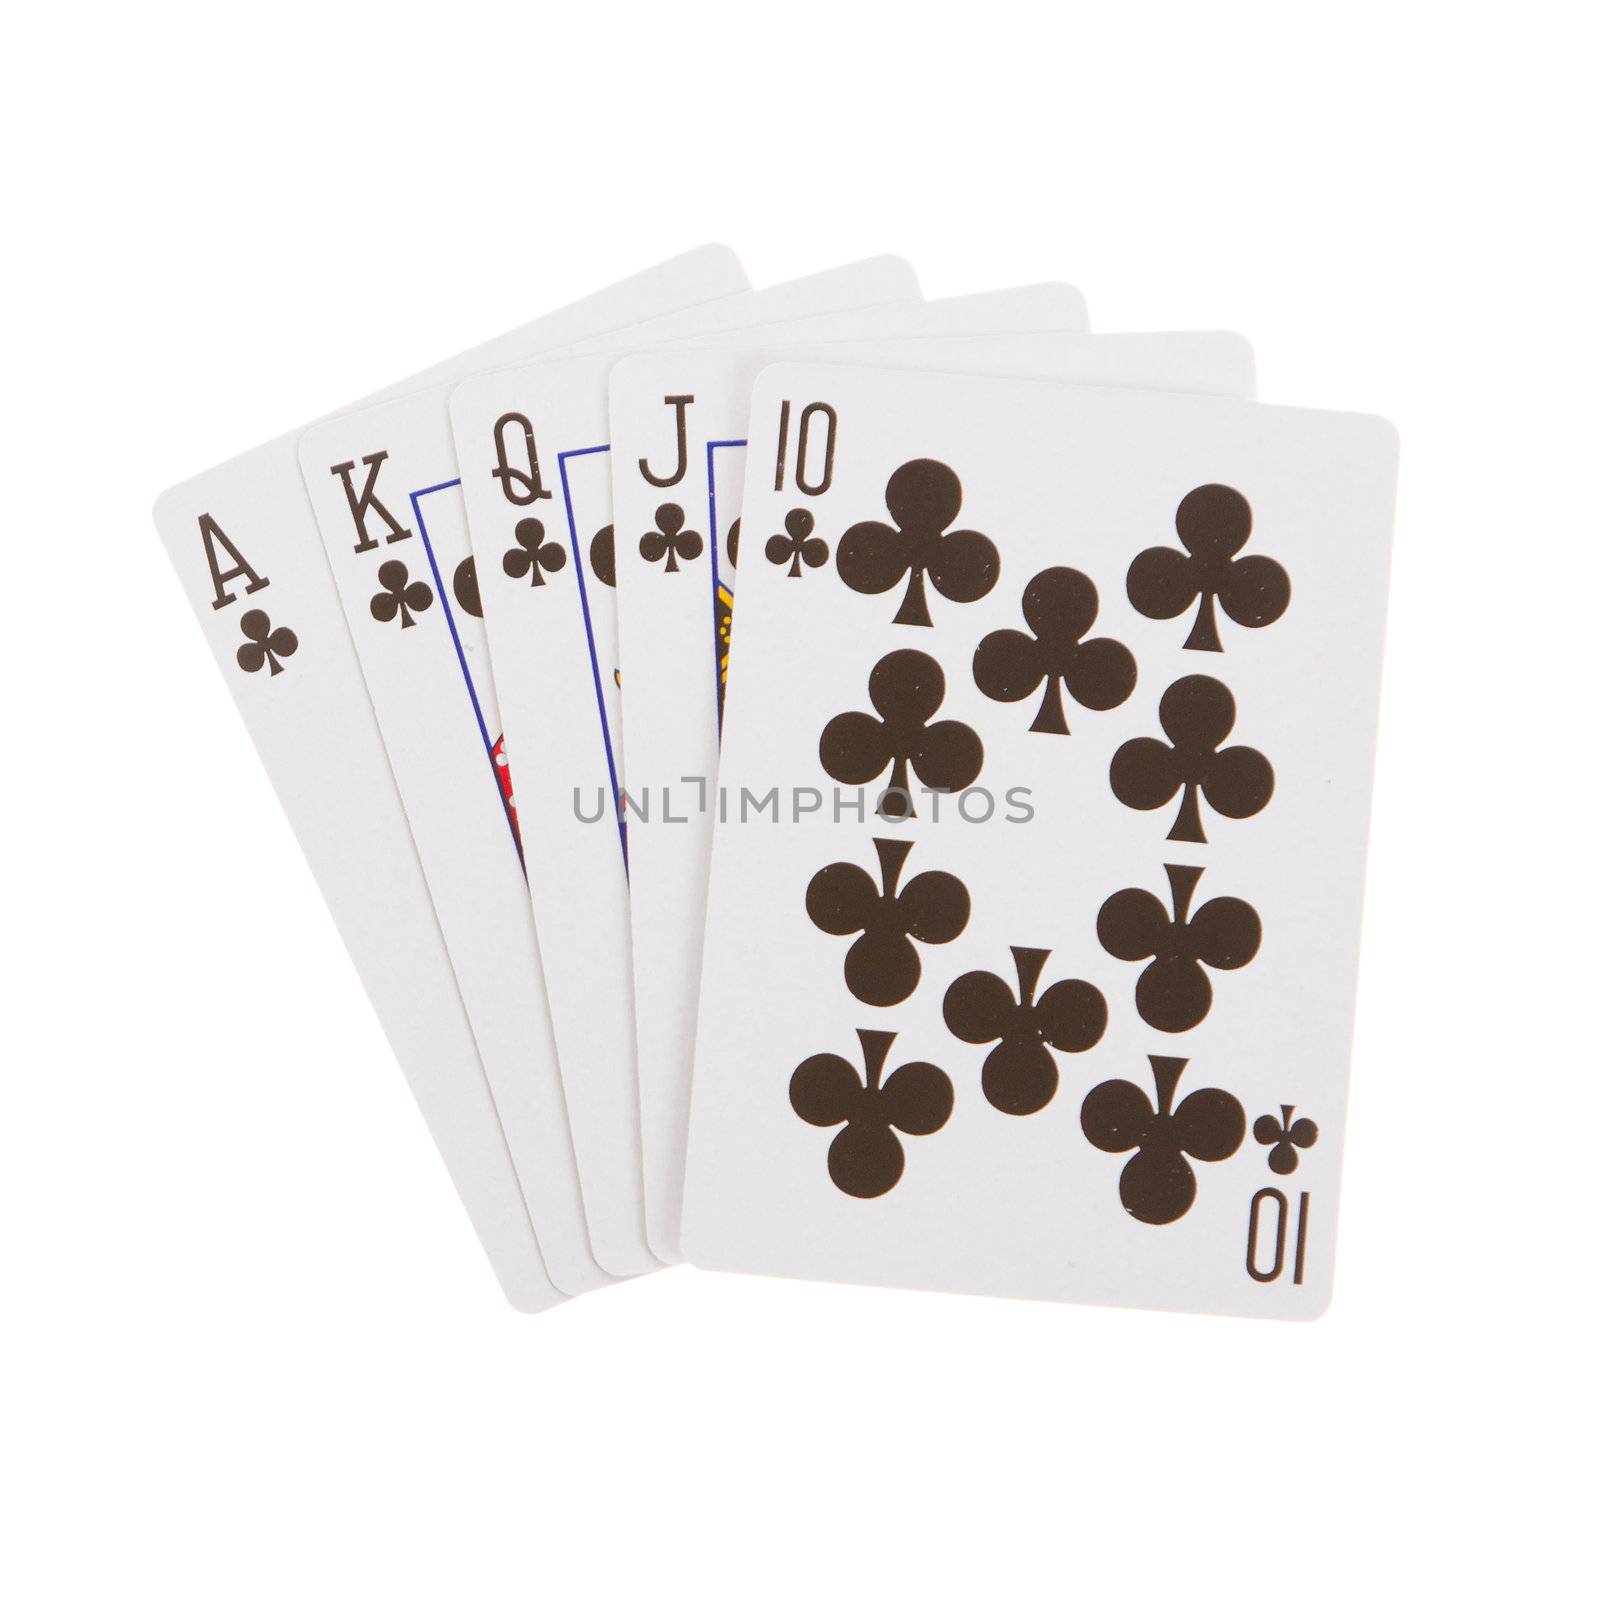 Cards for the poker on the table